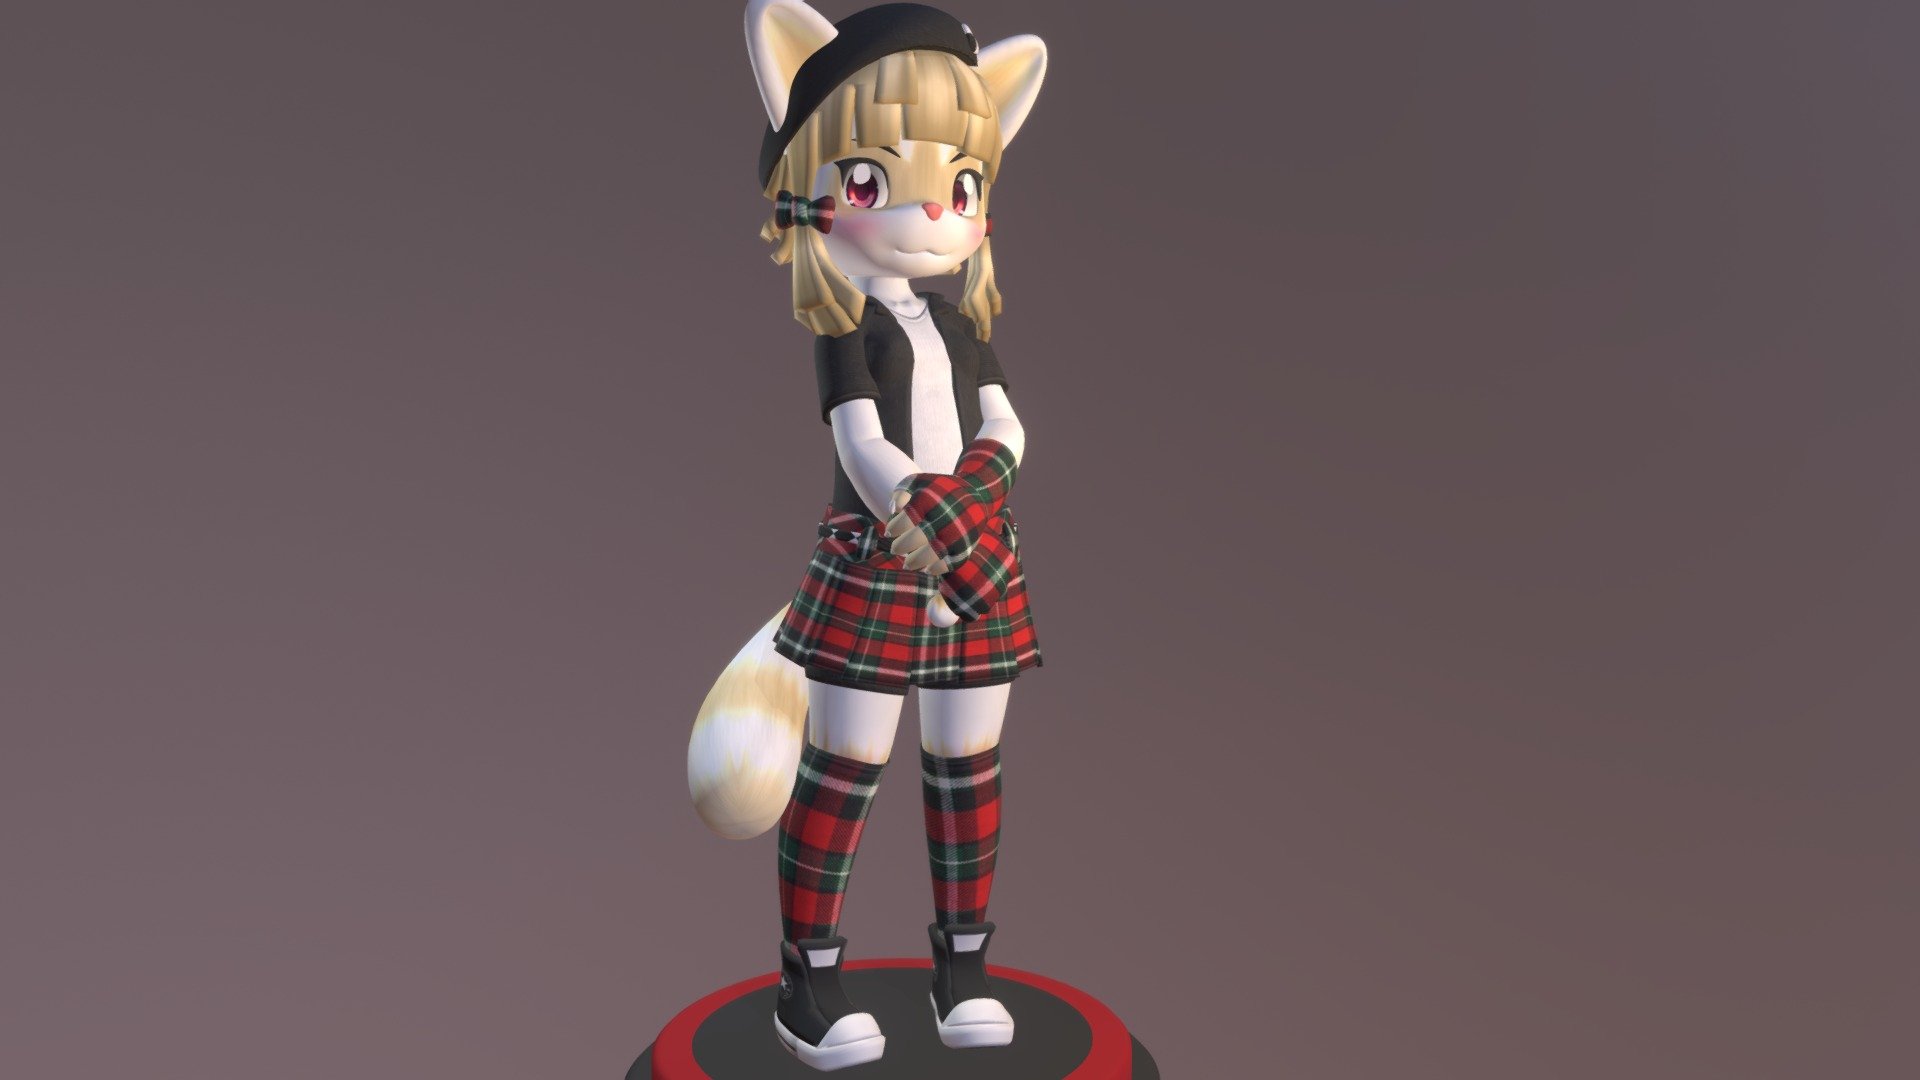 Character owned by me
Commissions: https://www.furaffinity.net/commissions/hickysnow/ - Claire Snow 001 - 3D model by HickySnow (@Hicky_Snow) 3d model